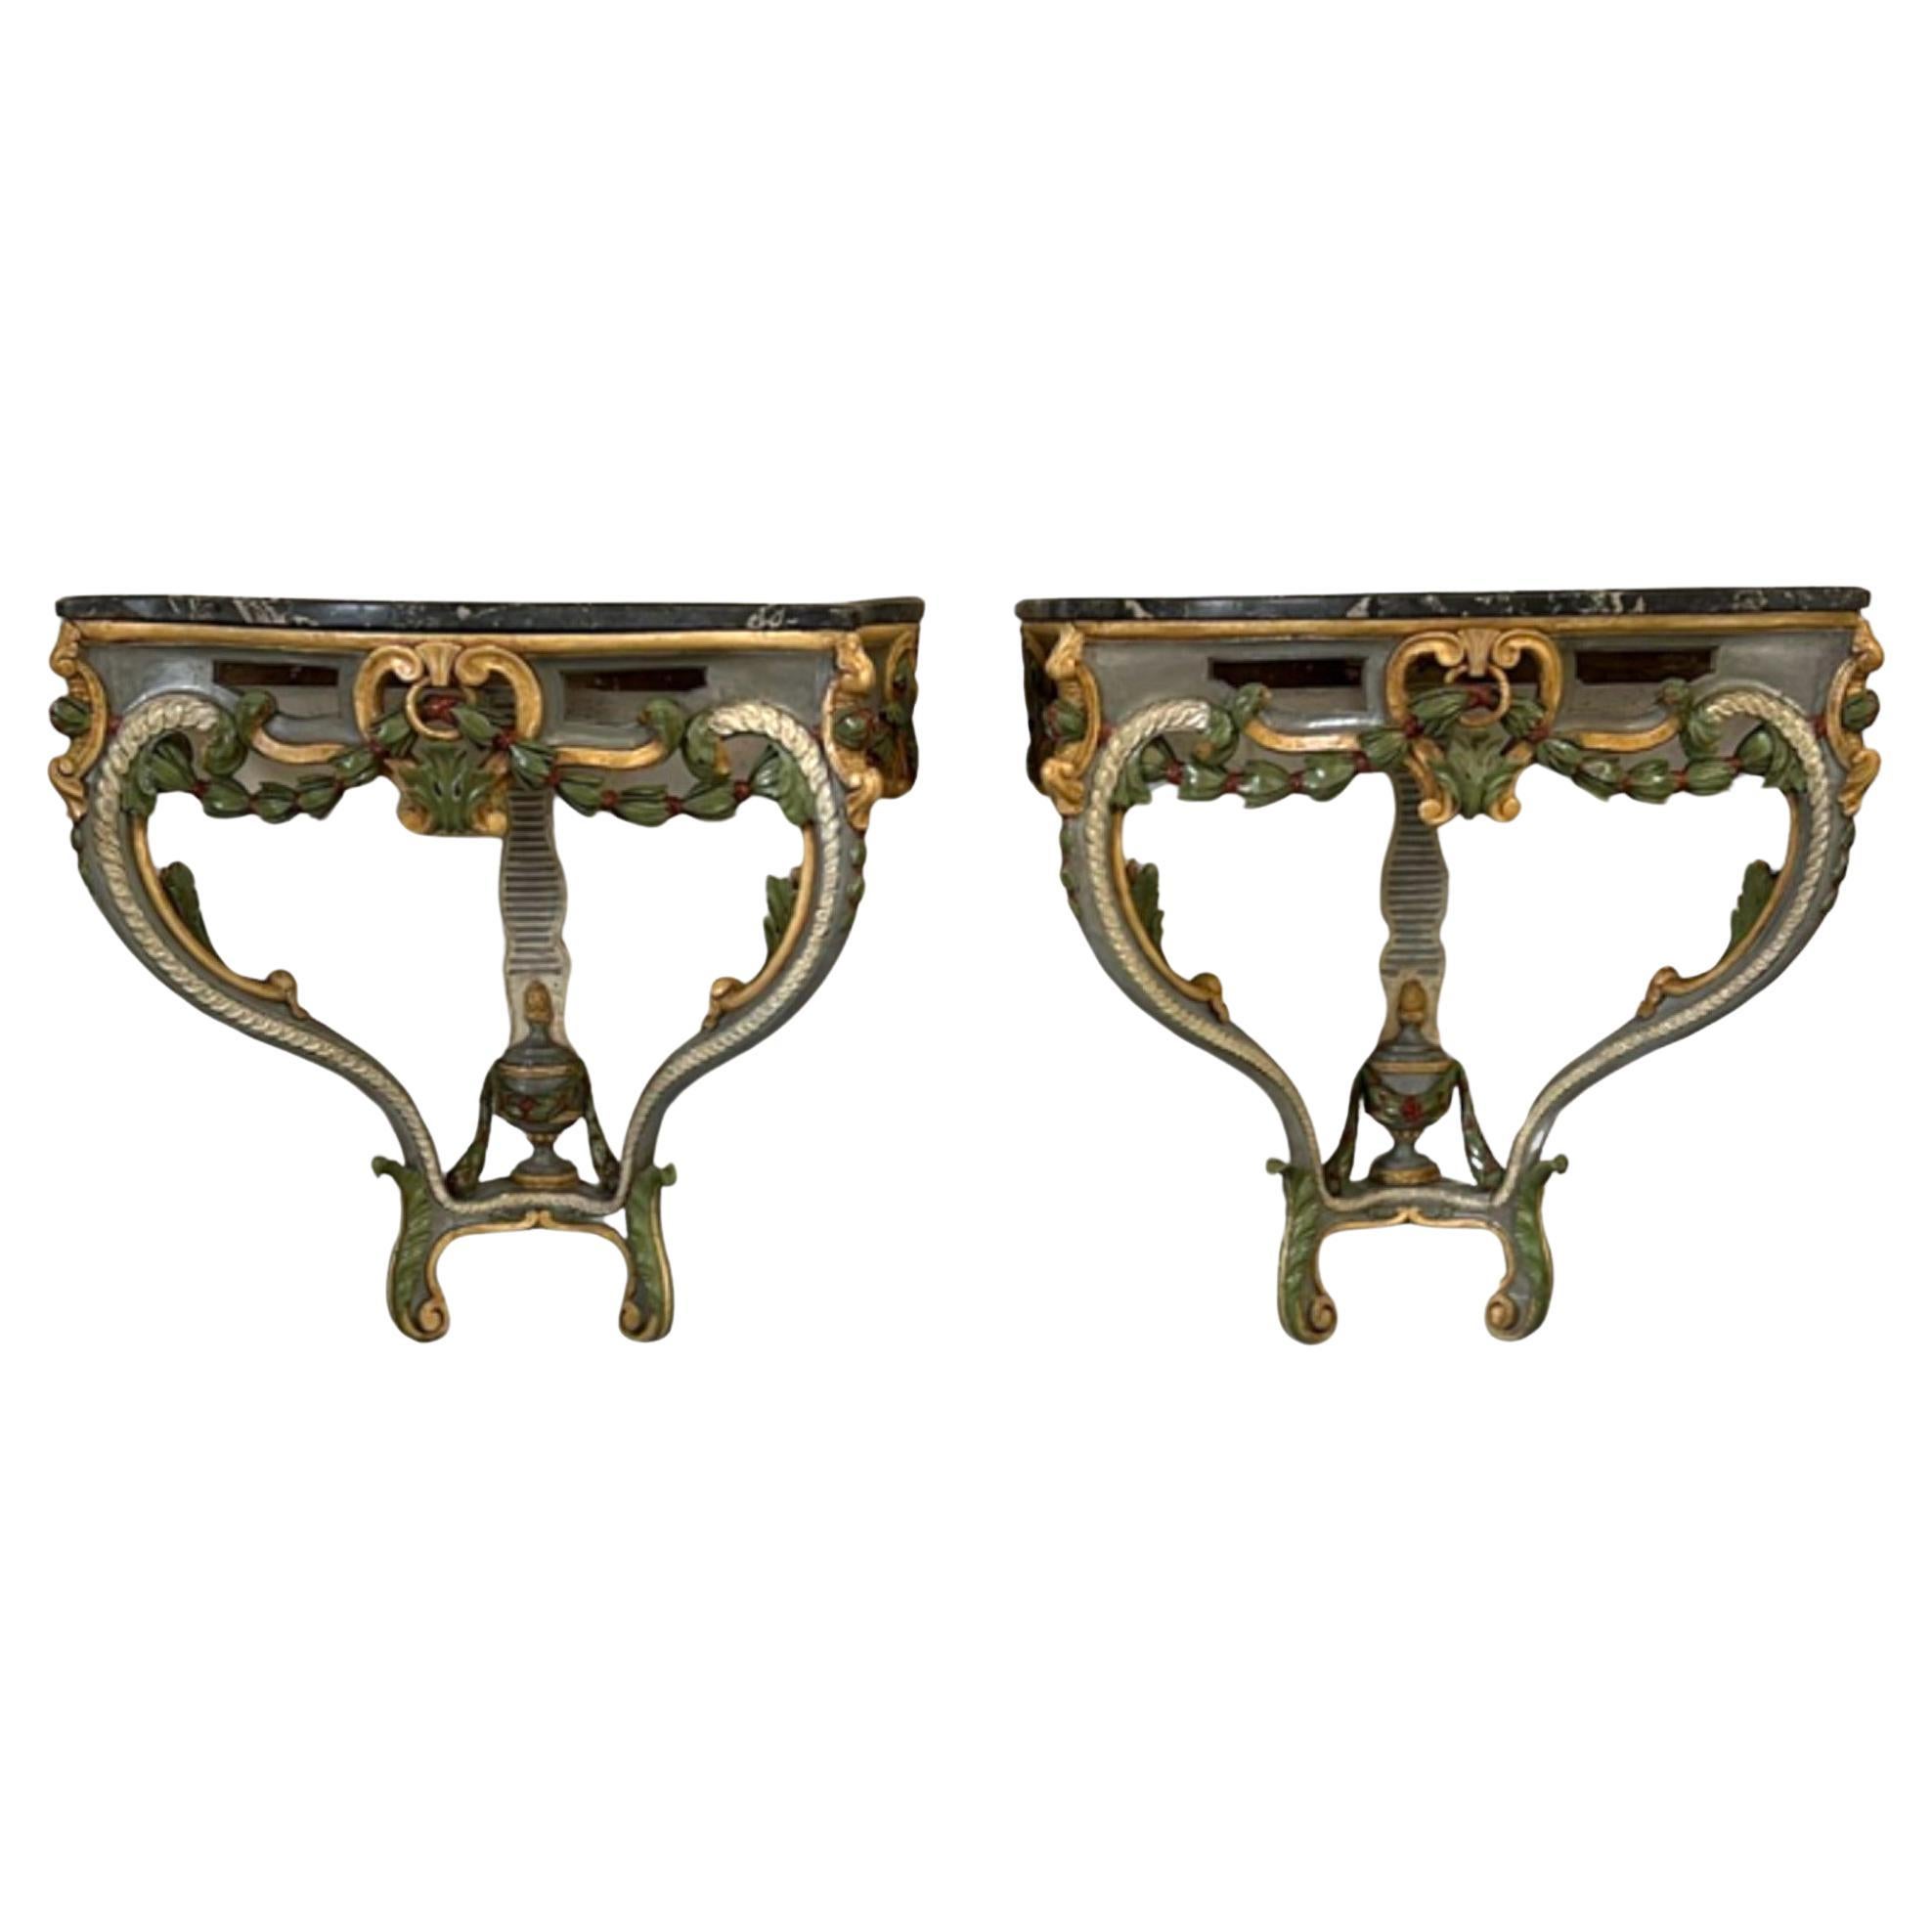 A Fabulous Pair of Hand Carved Italian Console Tables